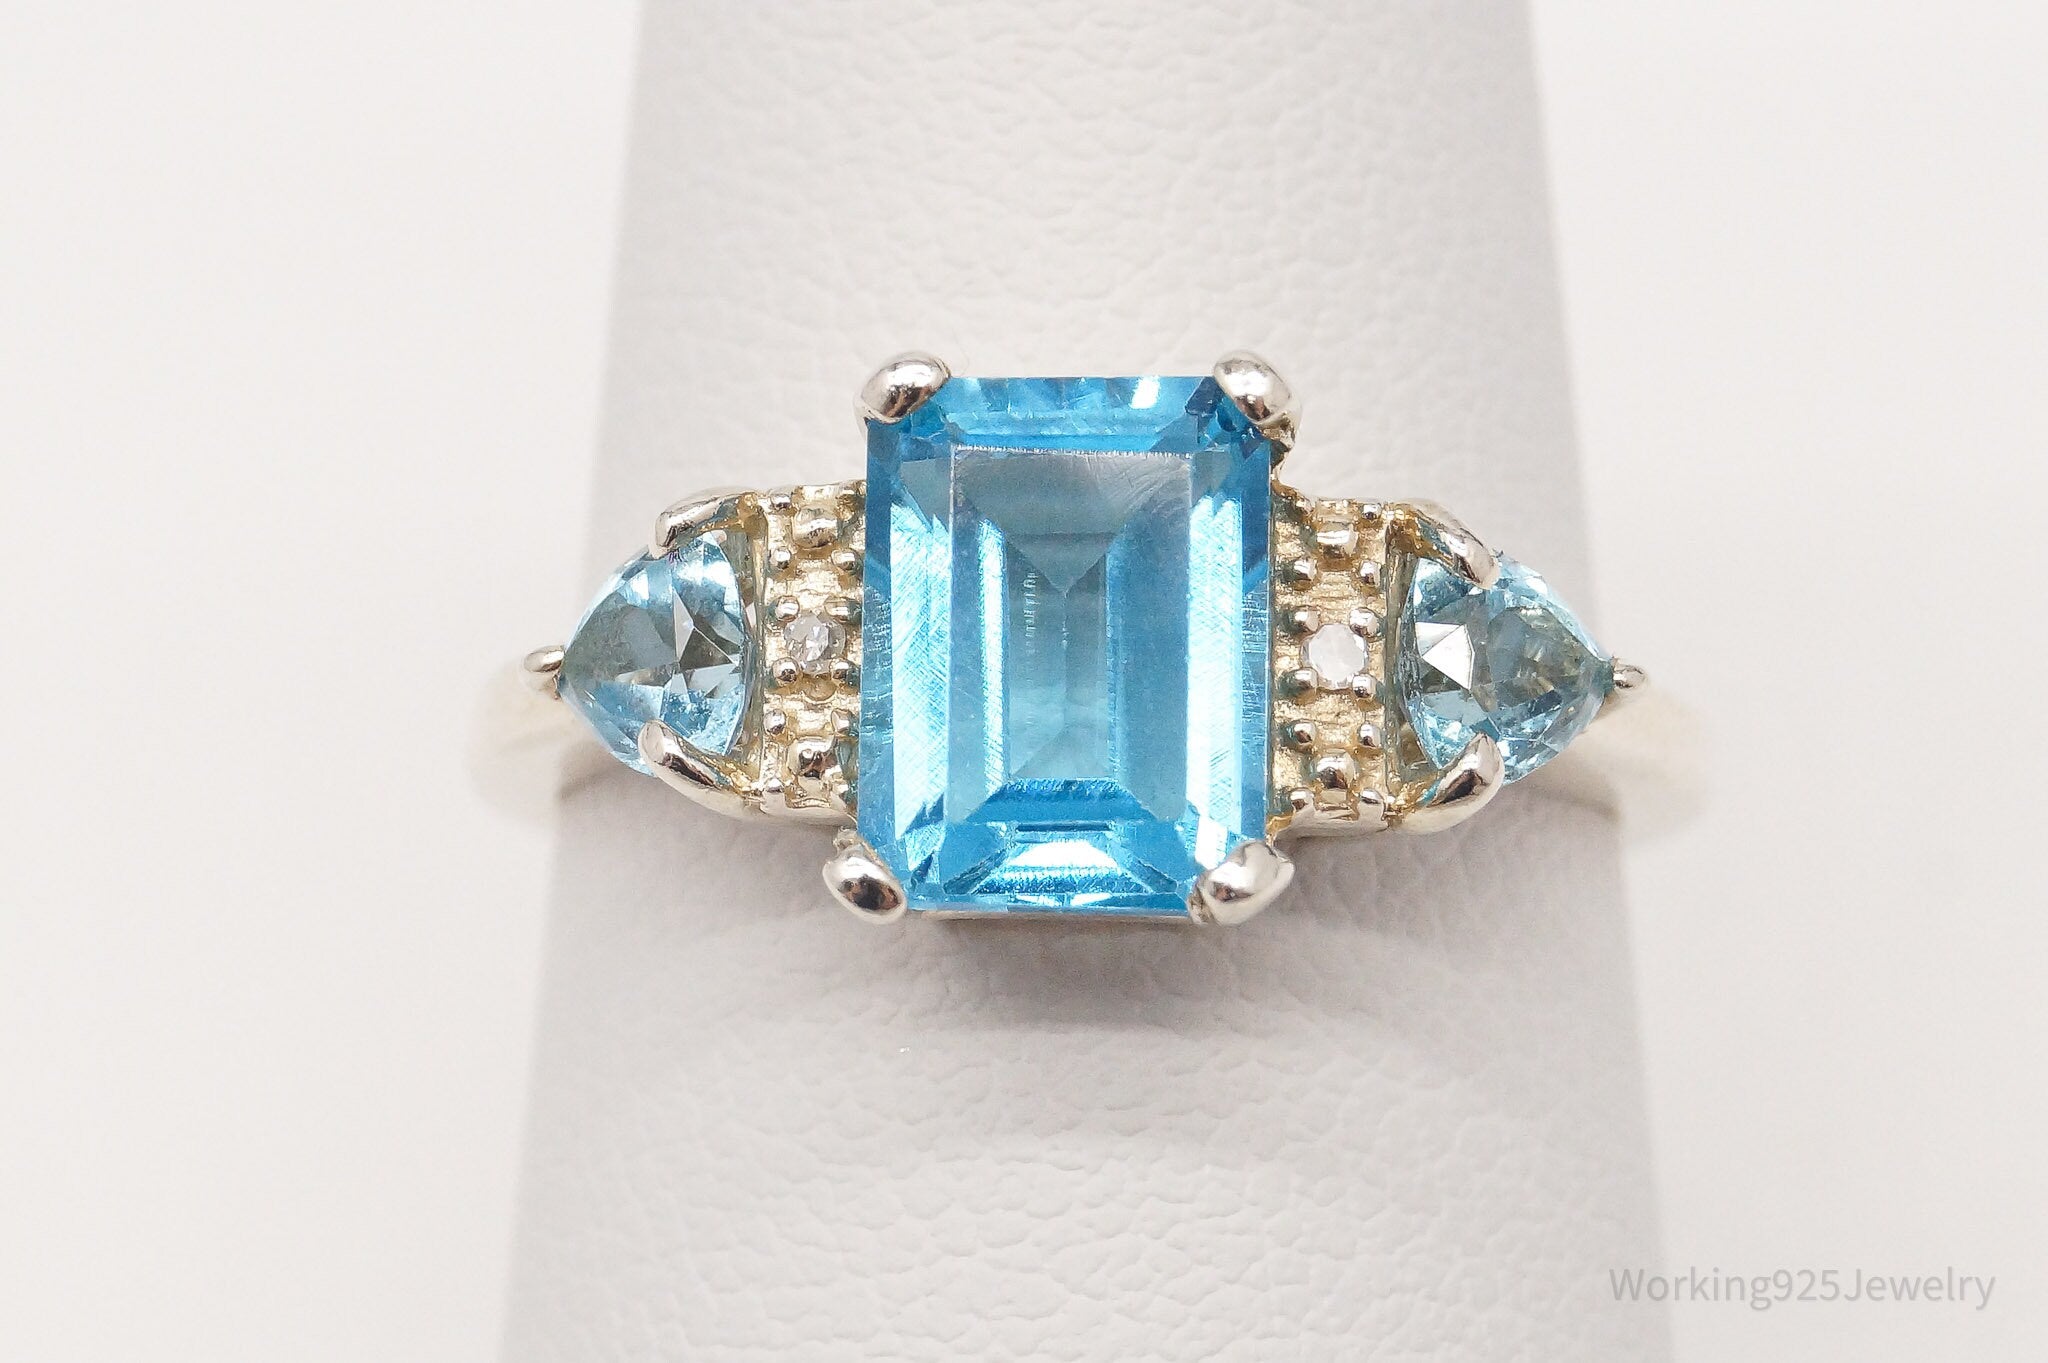 Vintage Blue Topaz Two Diamond Sterling Silver Ring - Size 6.75